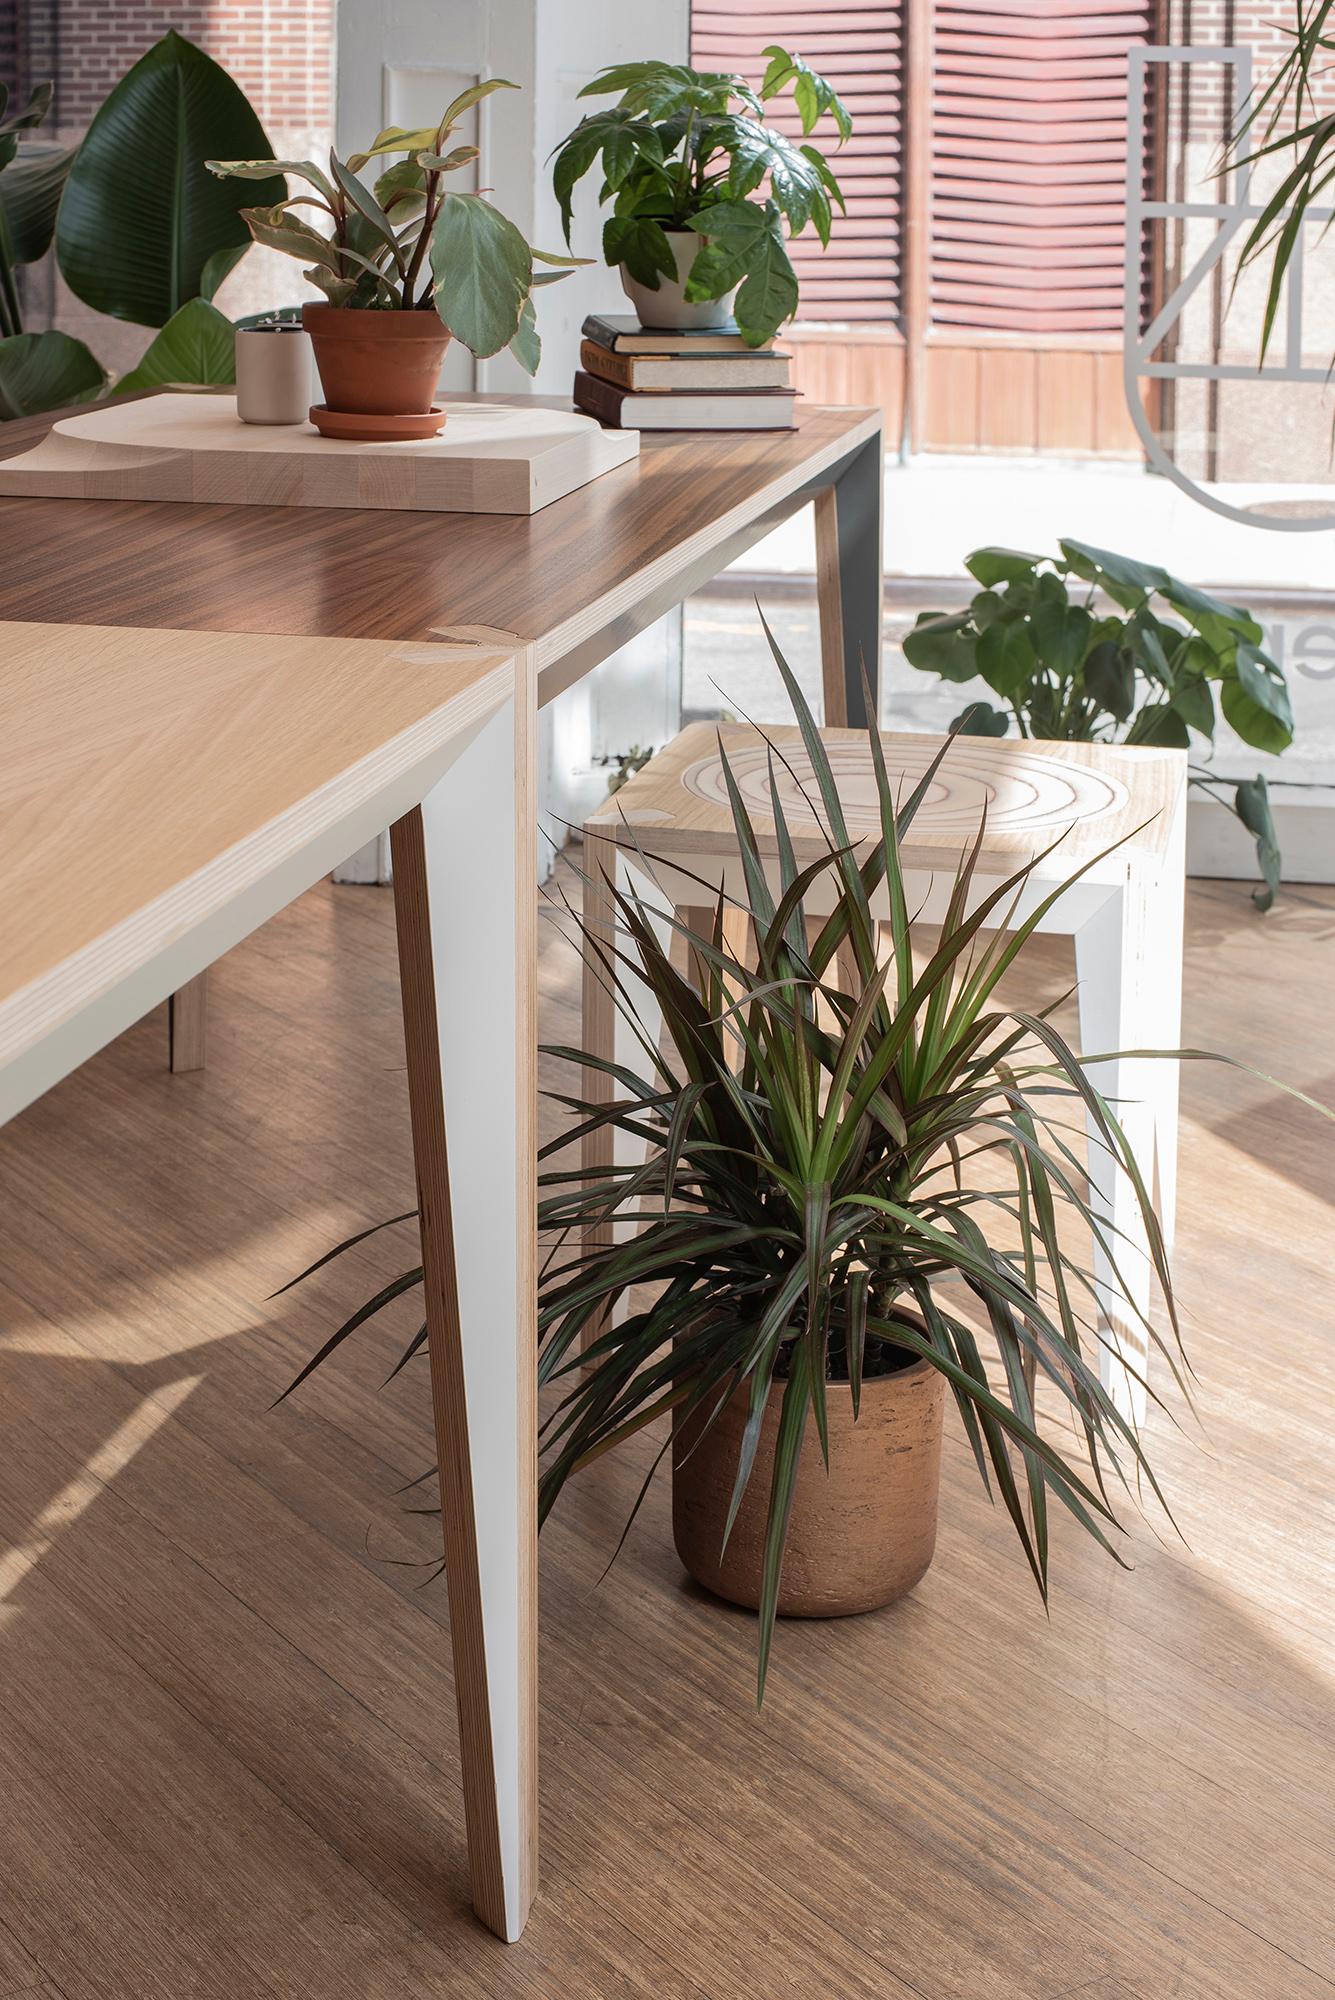 Contemporary Oak White MiMi Breakfast Square Table by Miduny, Made in Italy